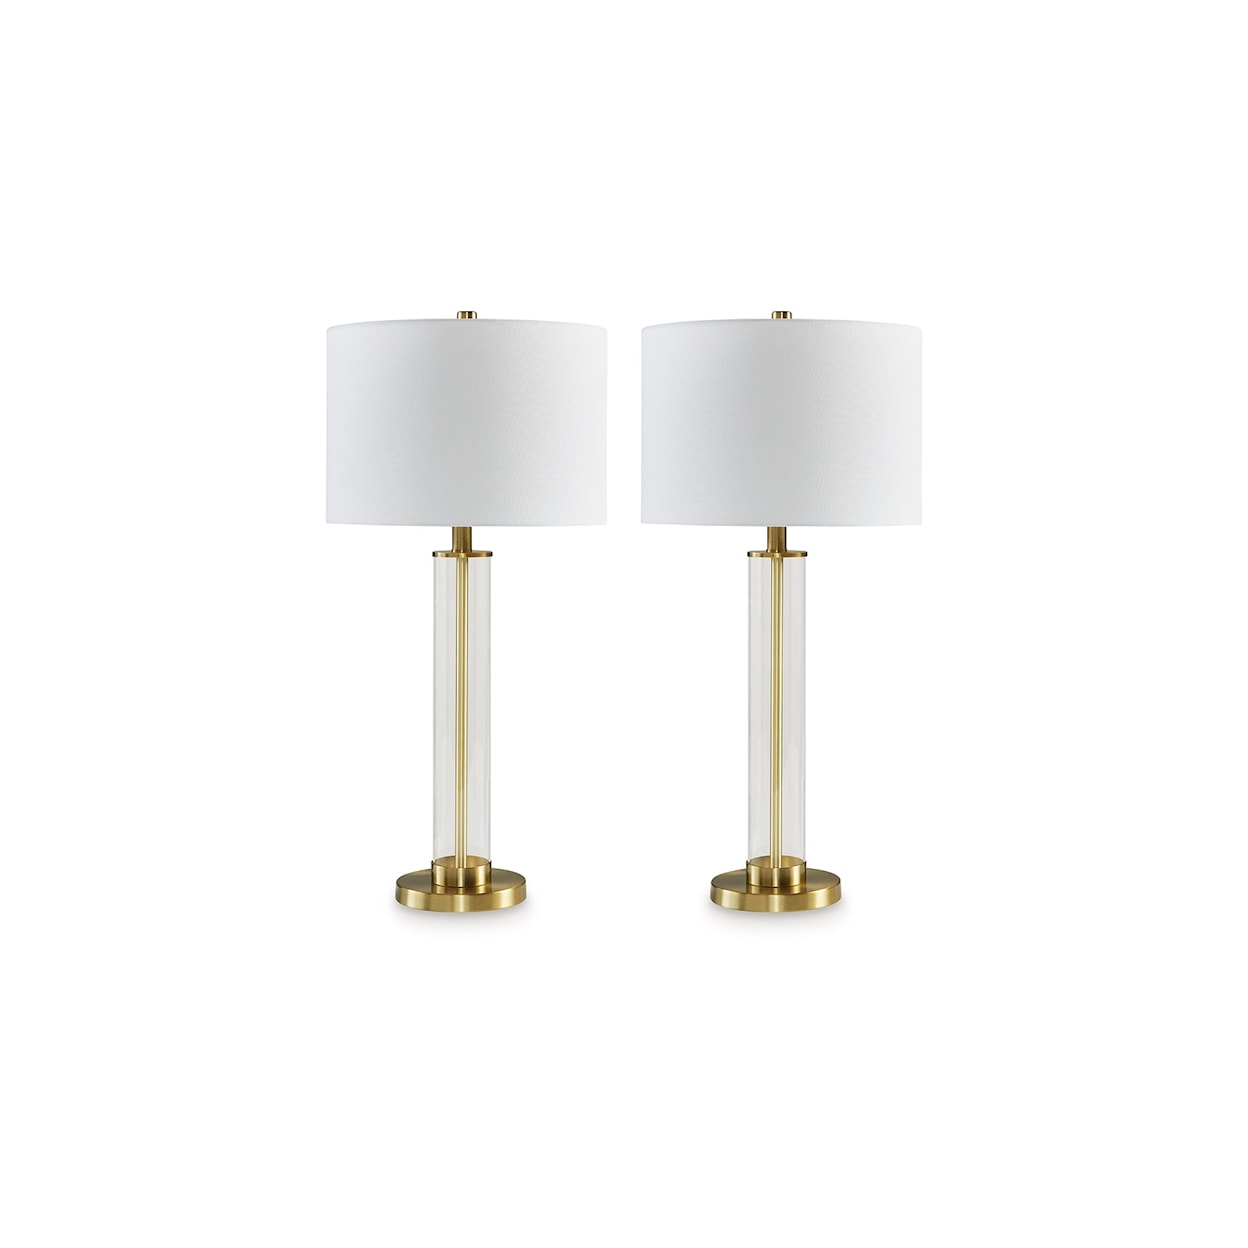 Signature Design by Ashley Orenman Glass Table Lamp (Set of 2)